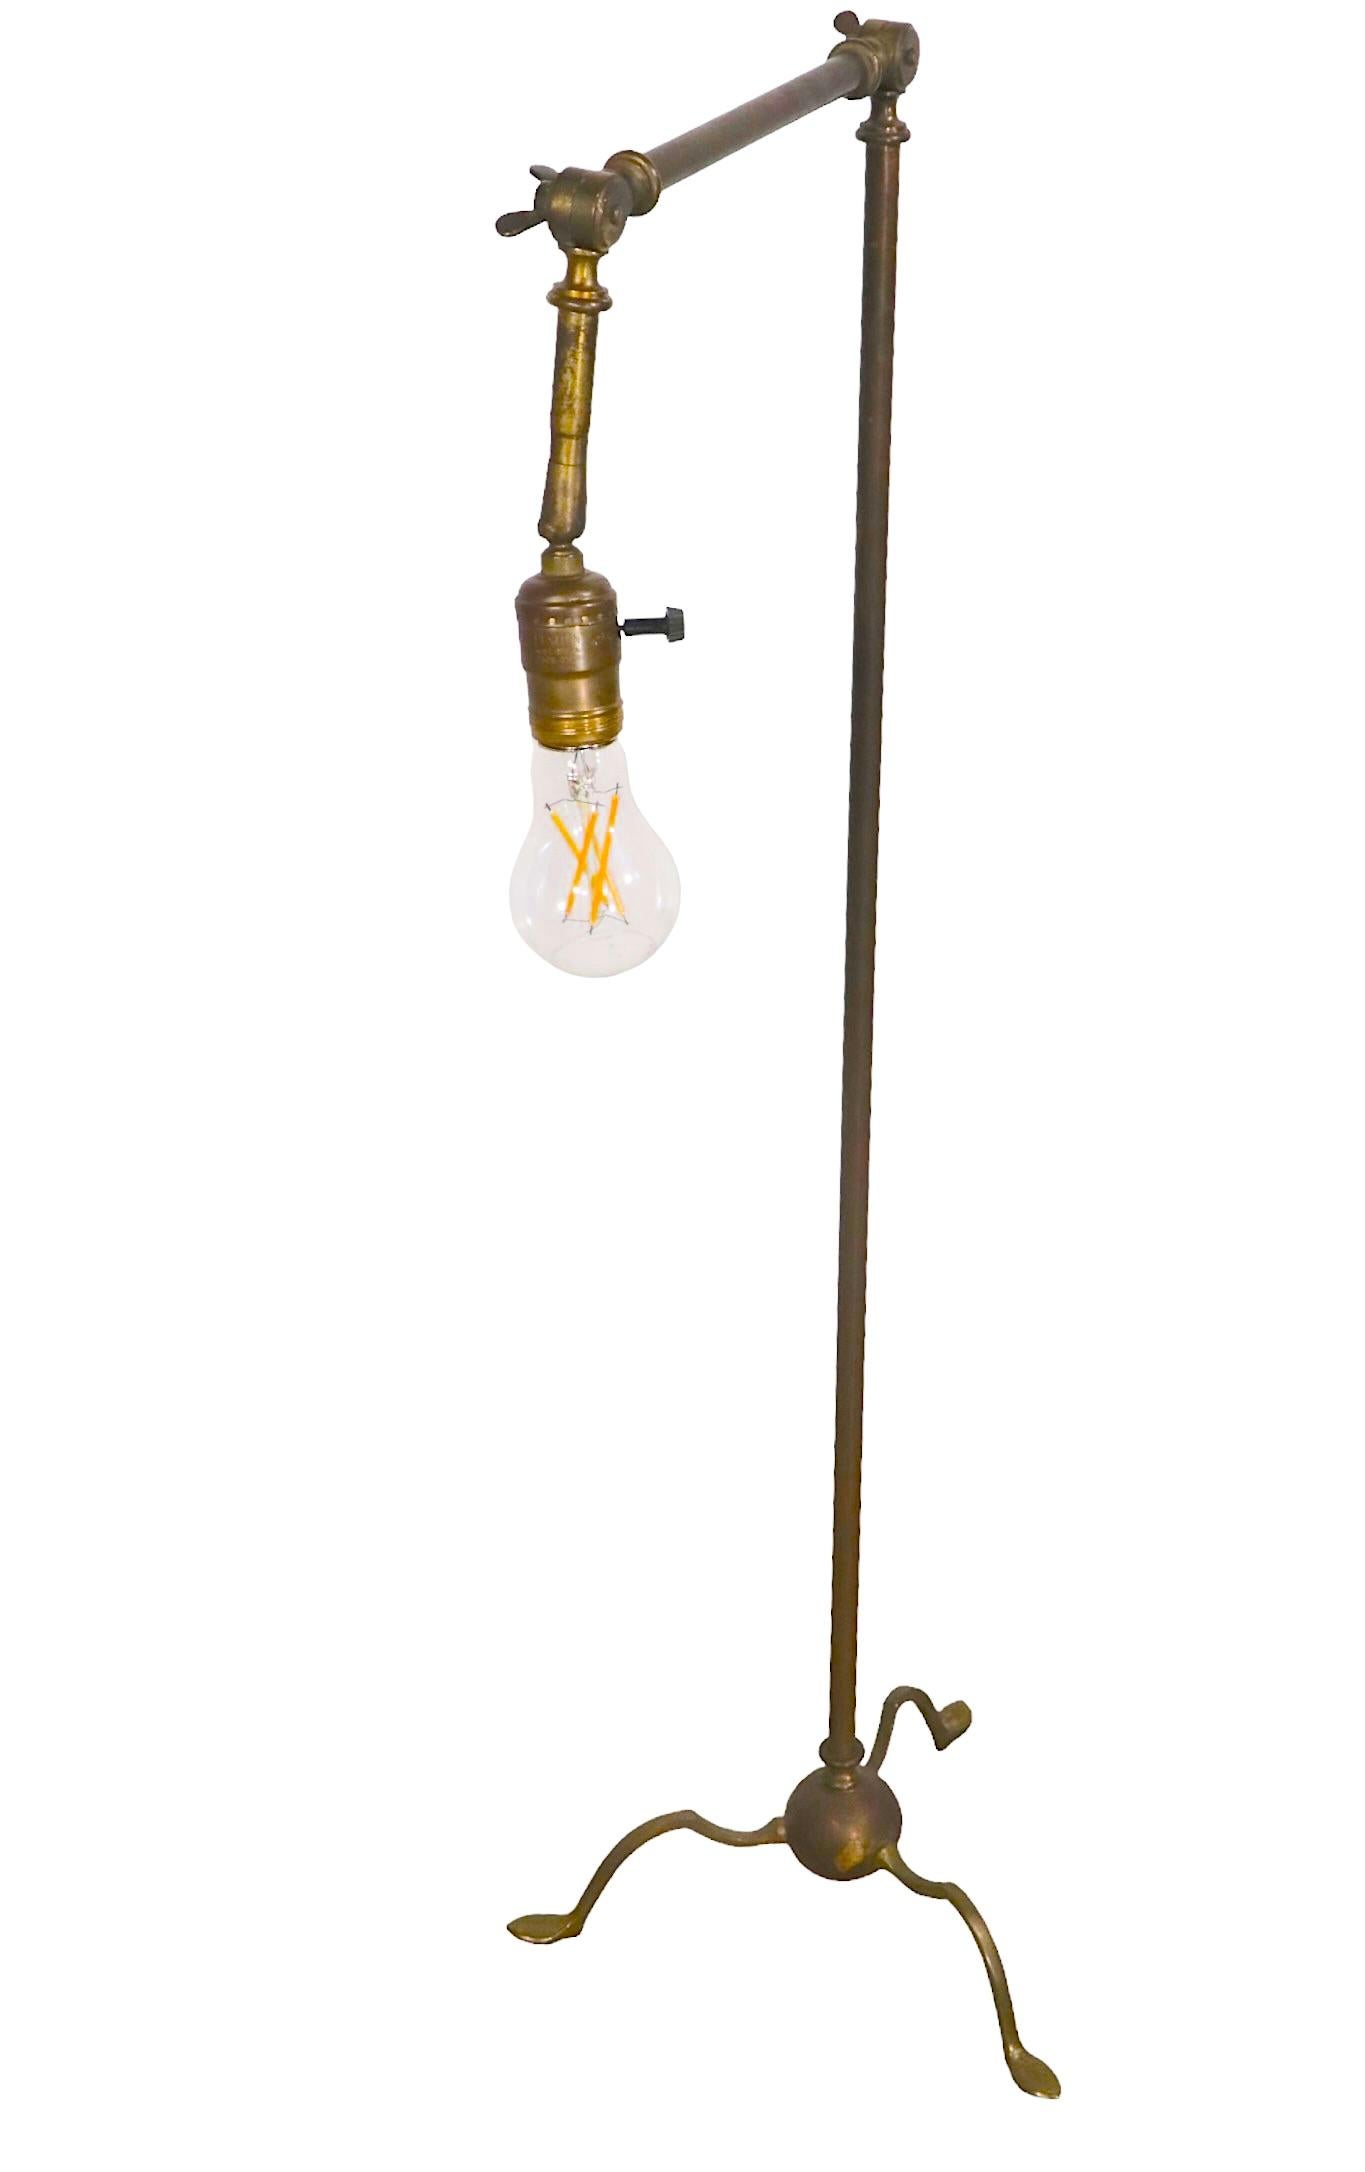 Articulating Brass Reading Floor Lamp in the Classical Style, C. 1900- 1930's For Sale 4